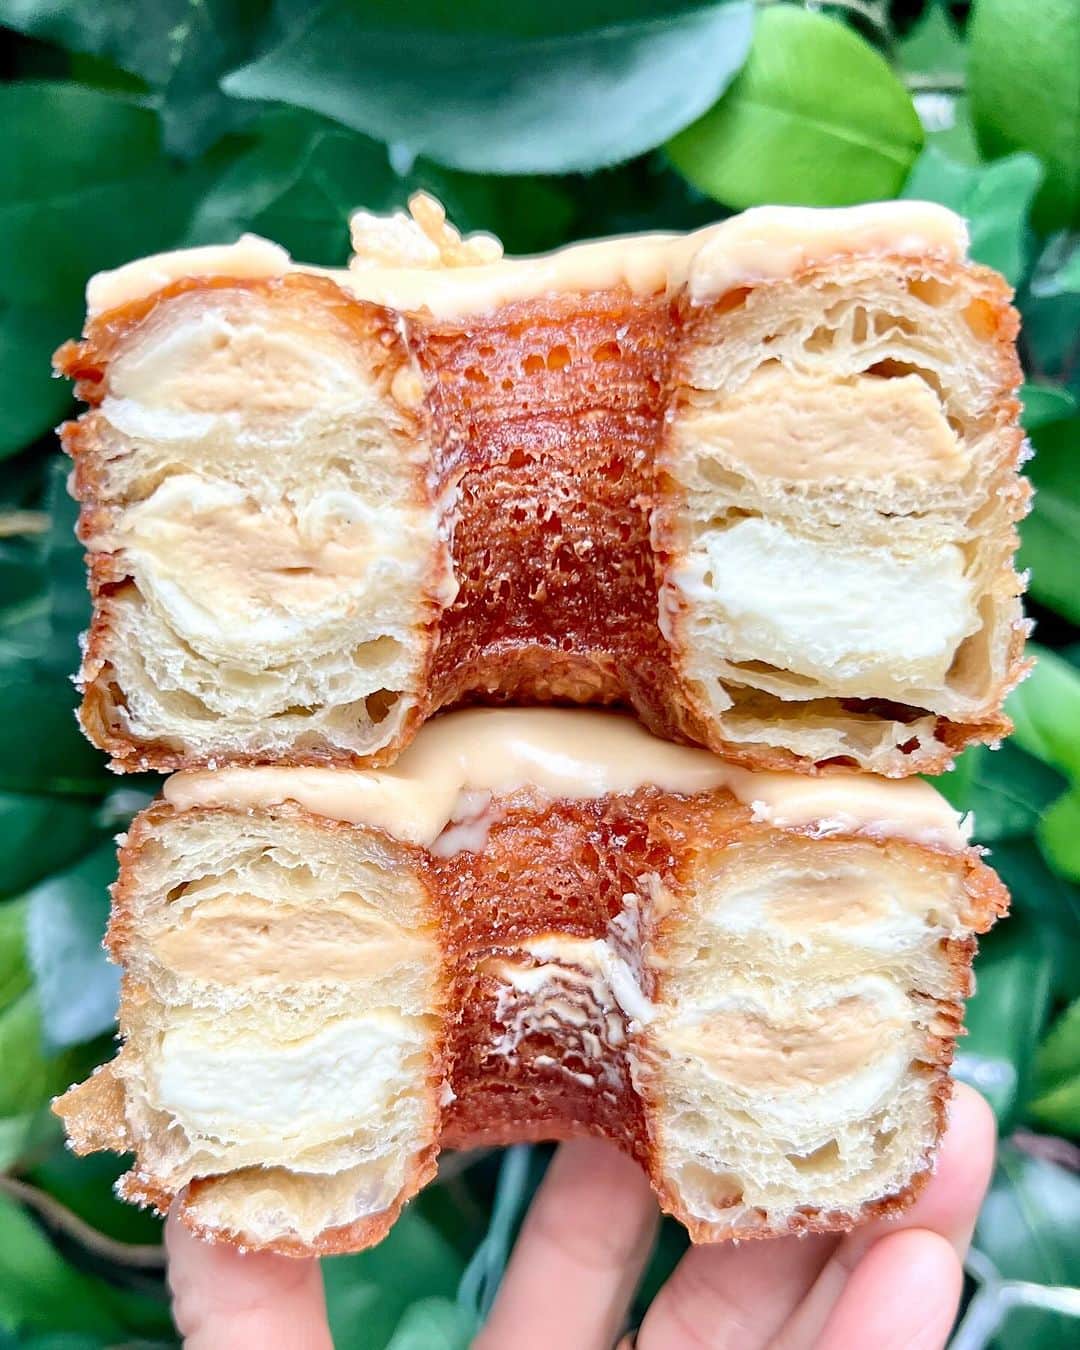 DOMINIQUE ANSEL BAKERYのインスタグラム：「Heading into November with our Cronut® for NYC: Salted Butterscotch & Rice Pudding, filled with salted butterscotch ganache and creamy vanilla rice pudding ganache. Starts Nov 1st here in Soho. Preorders are up at CronutPreorder.com (for pick-ups 2 weeks out and you can skip the line). A new batch for nationwide shipping ✈️ is now live at DominiqueAnselOnline.com (tap the photo ⬆️ for shipping).」